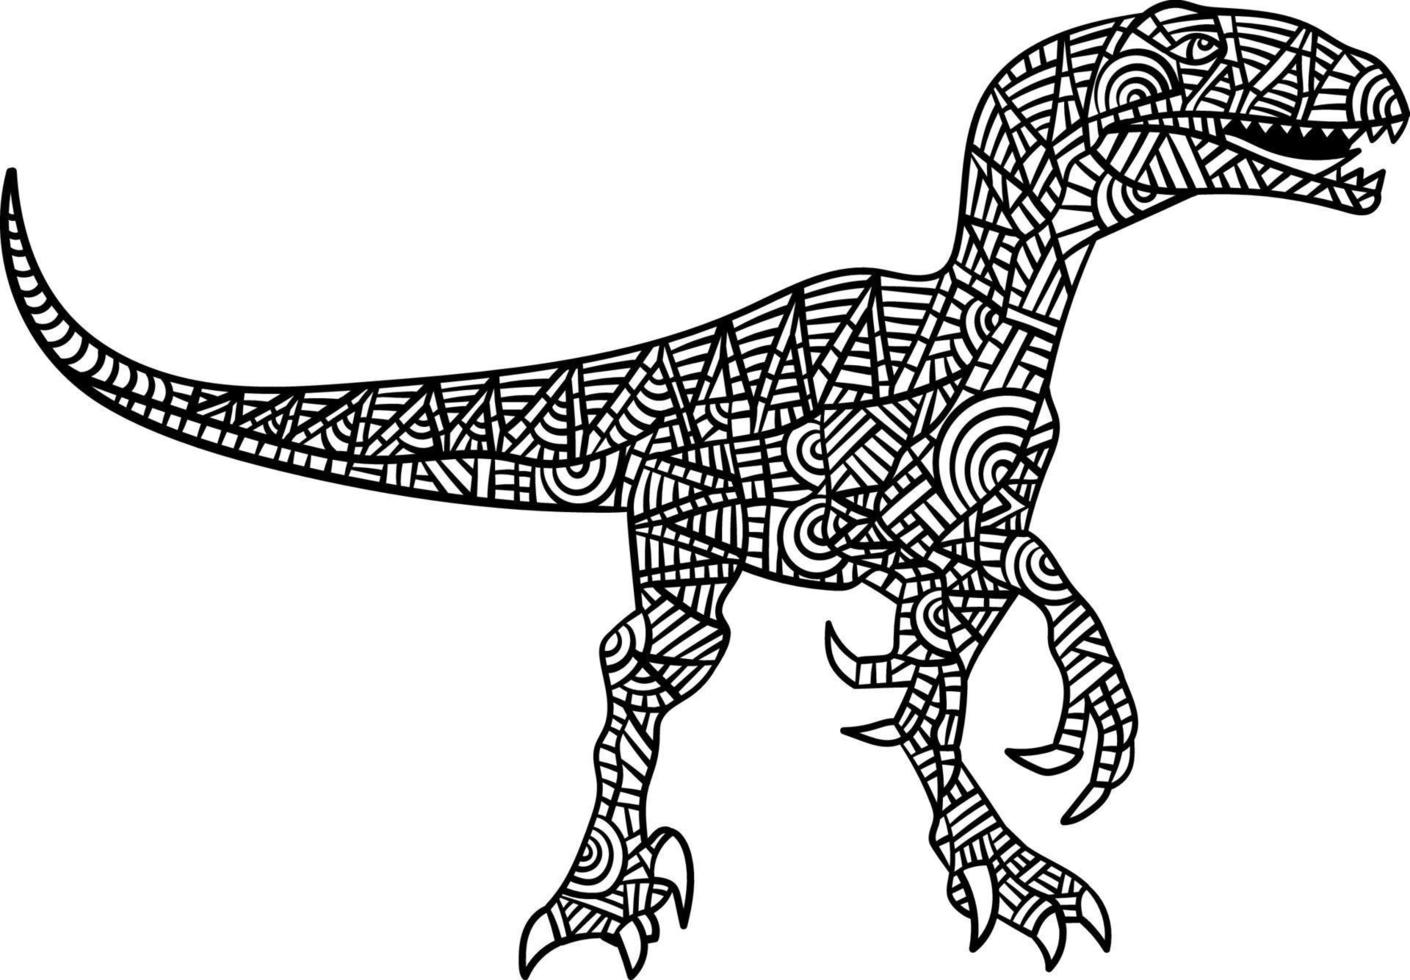 Velociraptor Mandala Coloring Pages for Adults vector